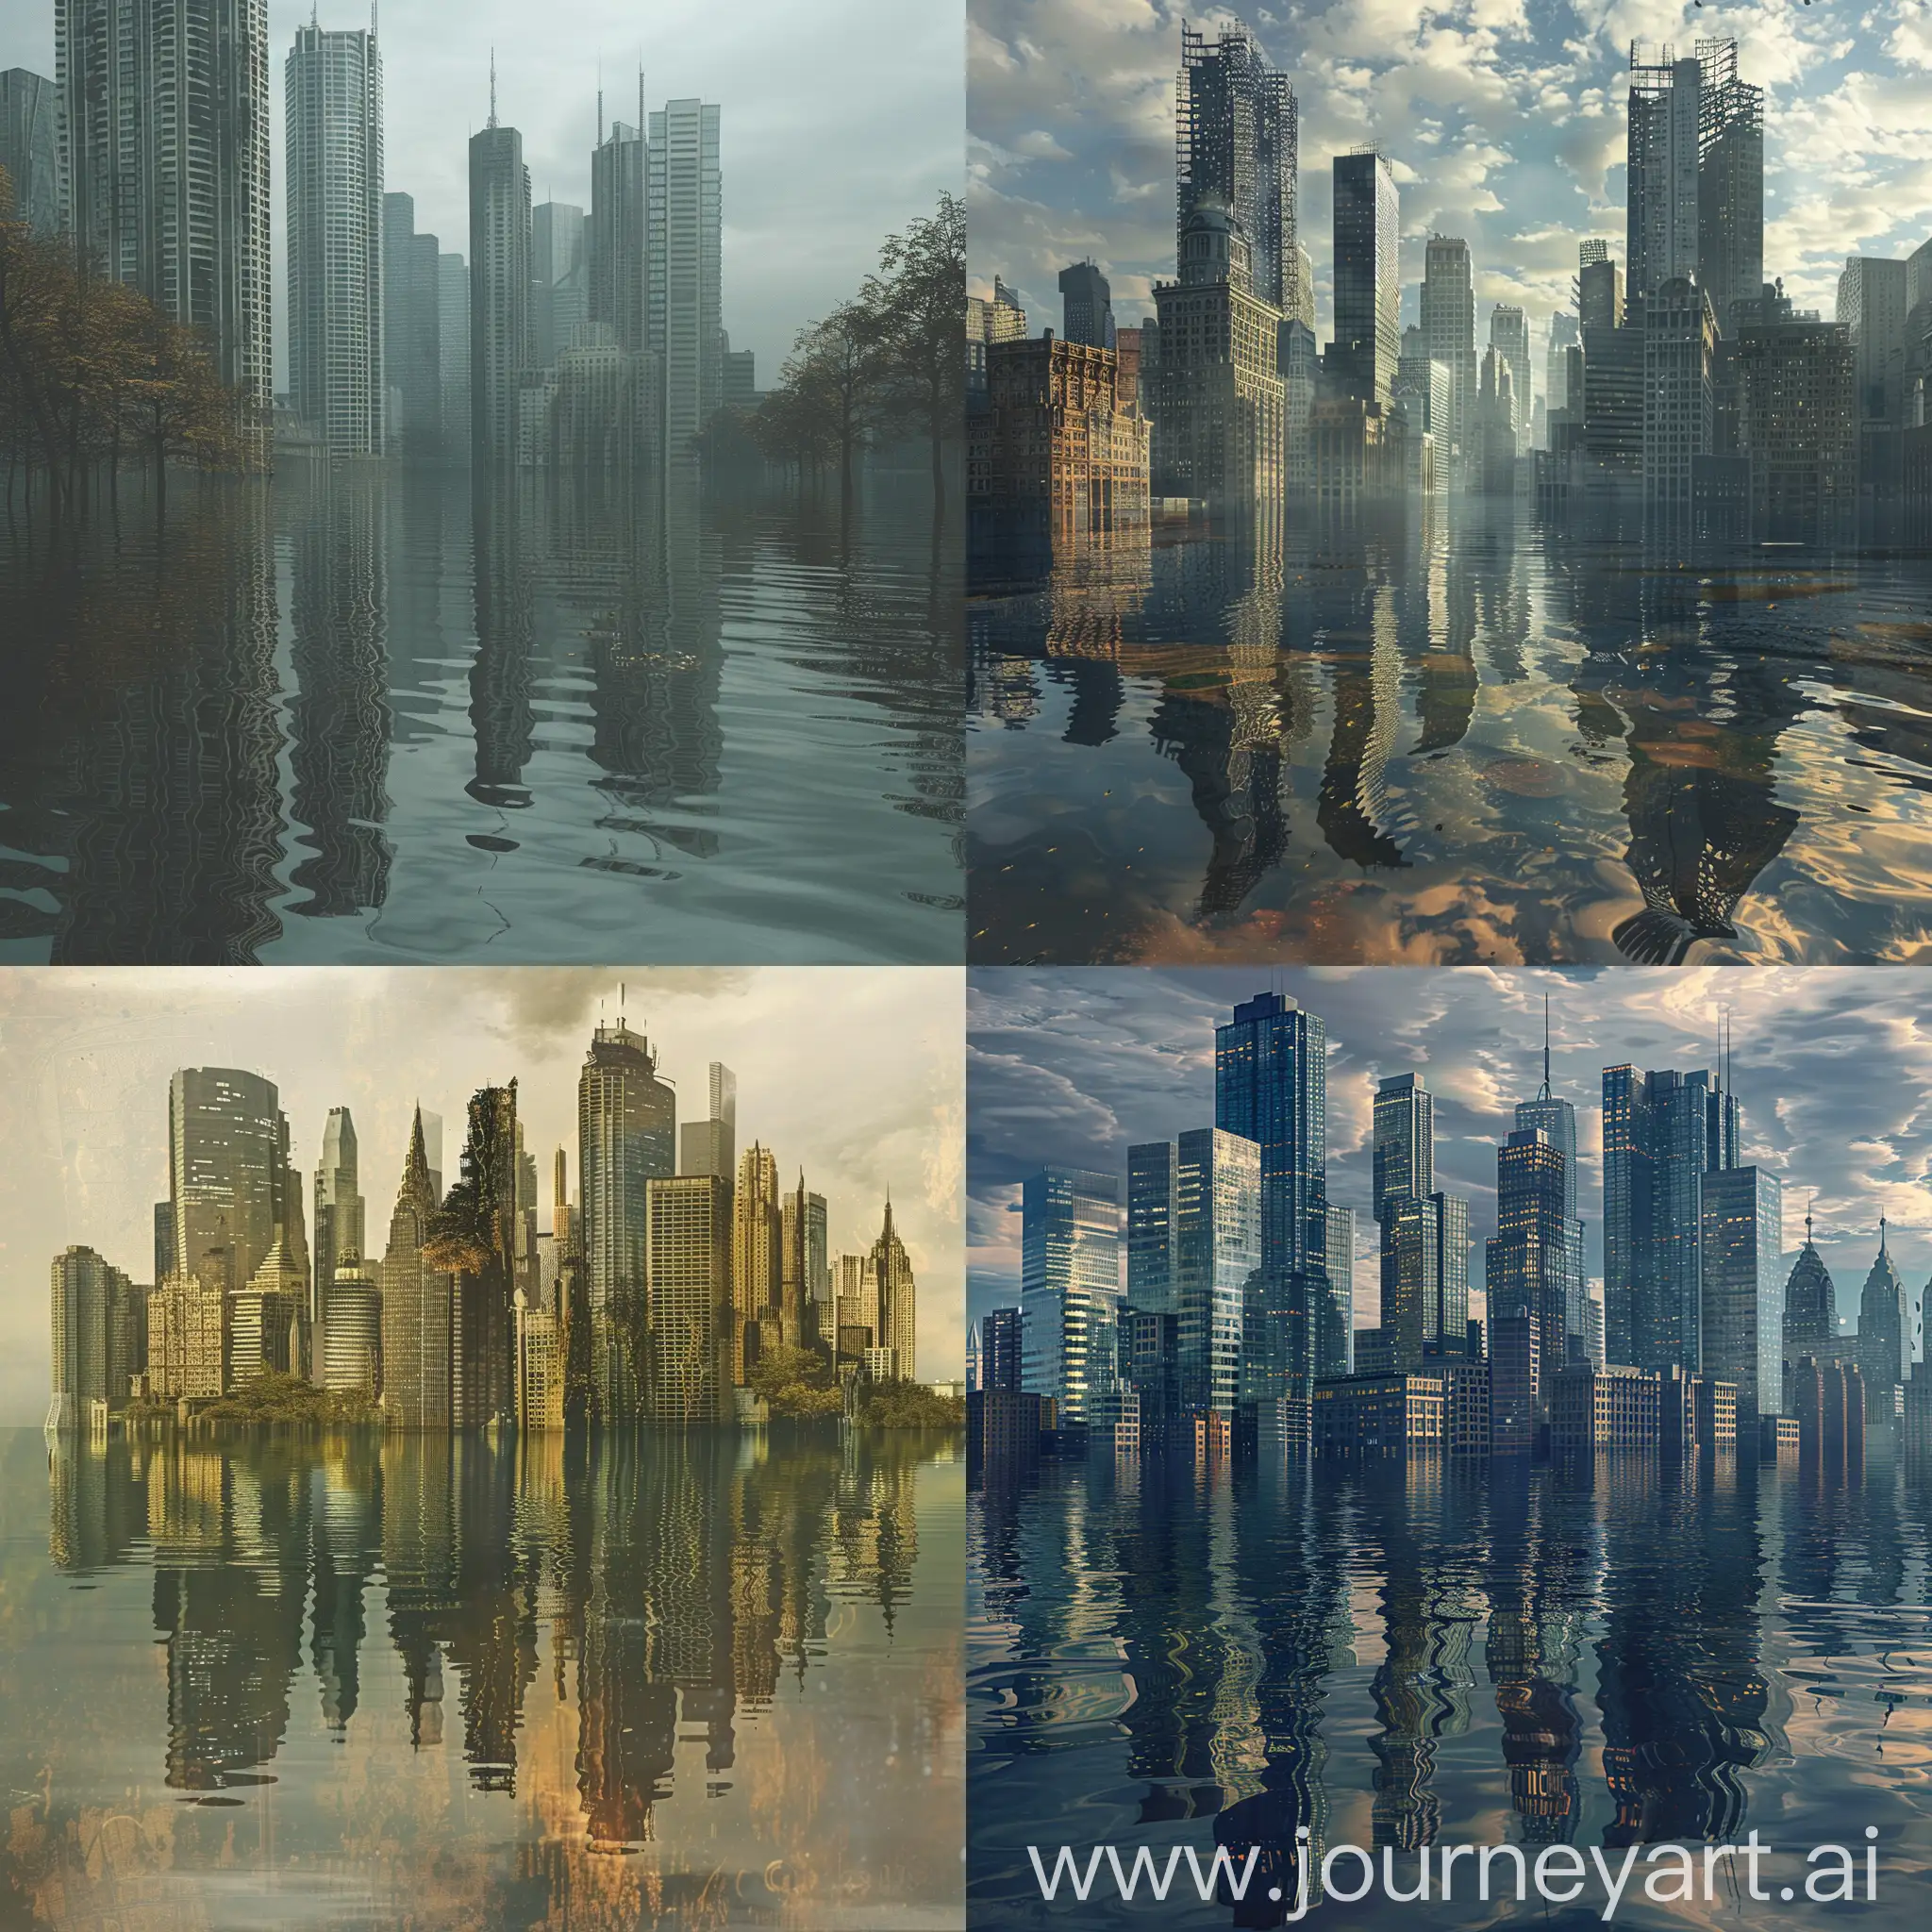 Apocalyptic-Cityscape-Skyscrapers-Submerged-in-Rising-Tides